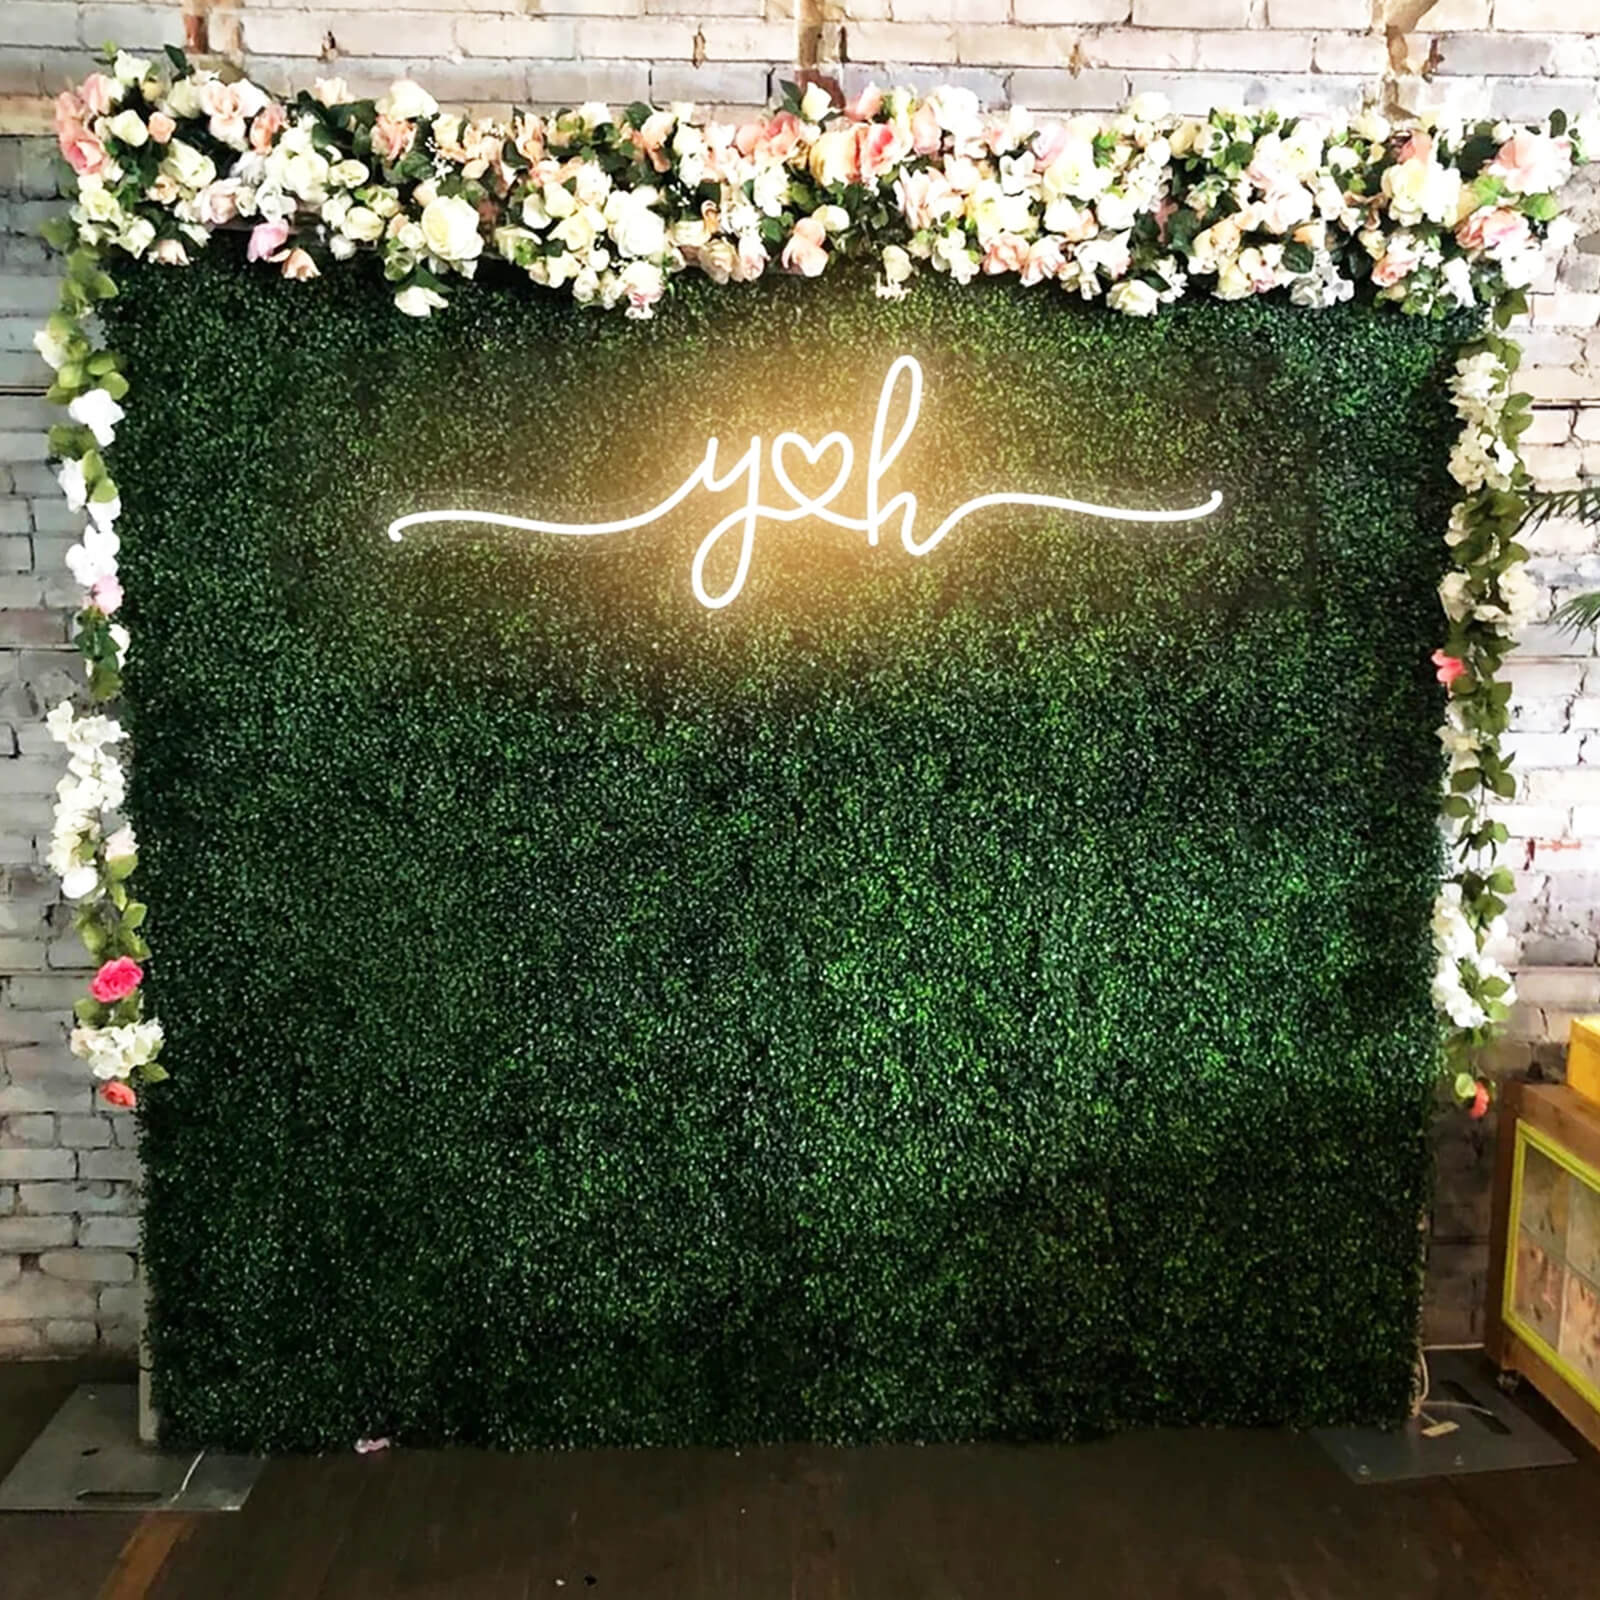 neon sign for wedding yh